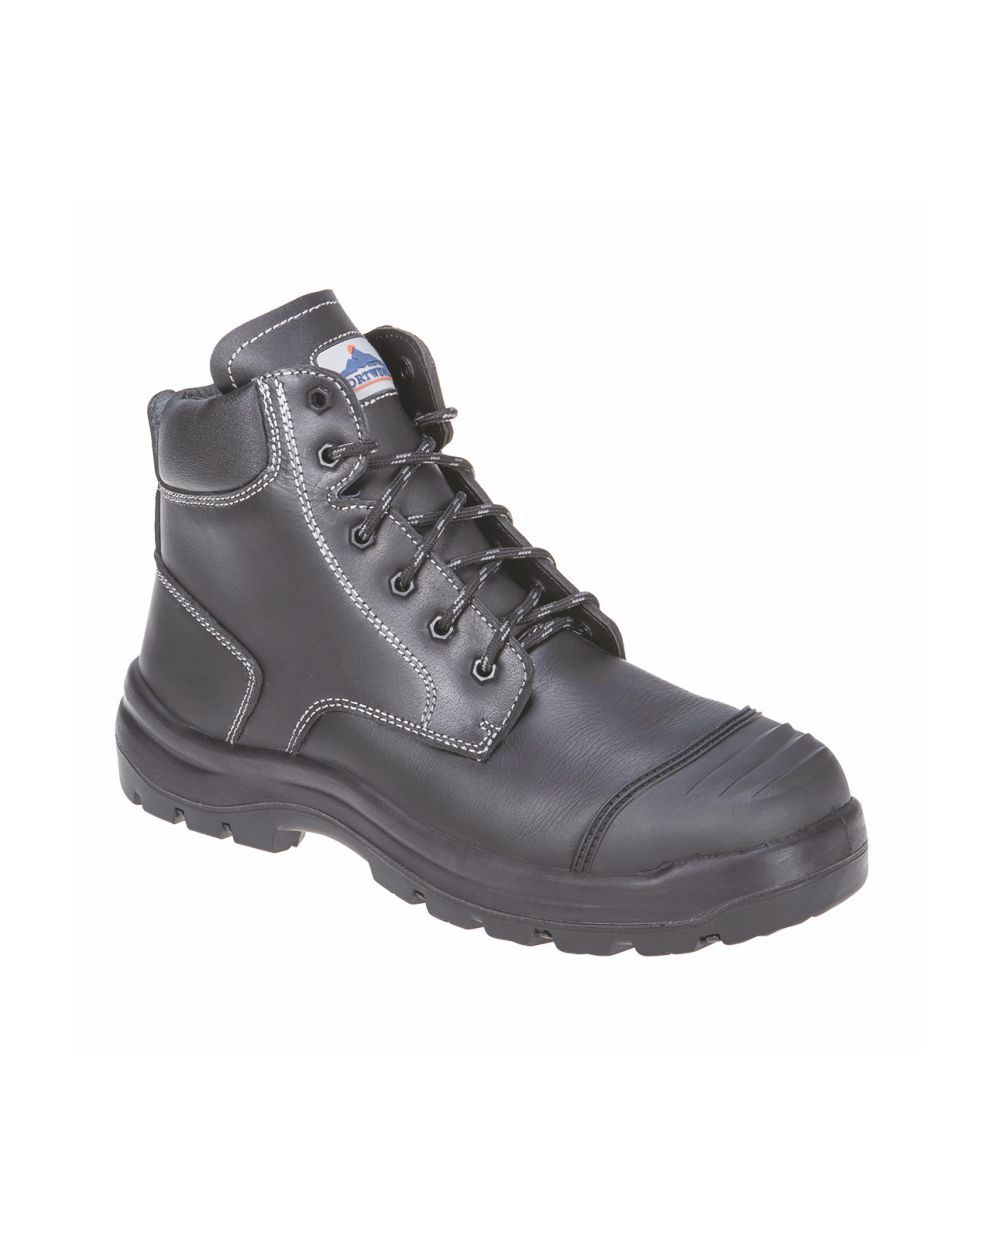 Portwest FD10 Clyde S3 Safety Boot (FD10) - LA Safety Supplies